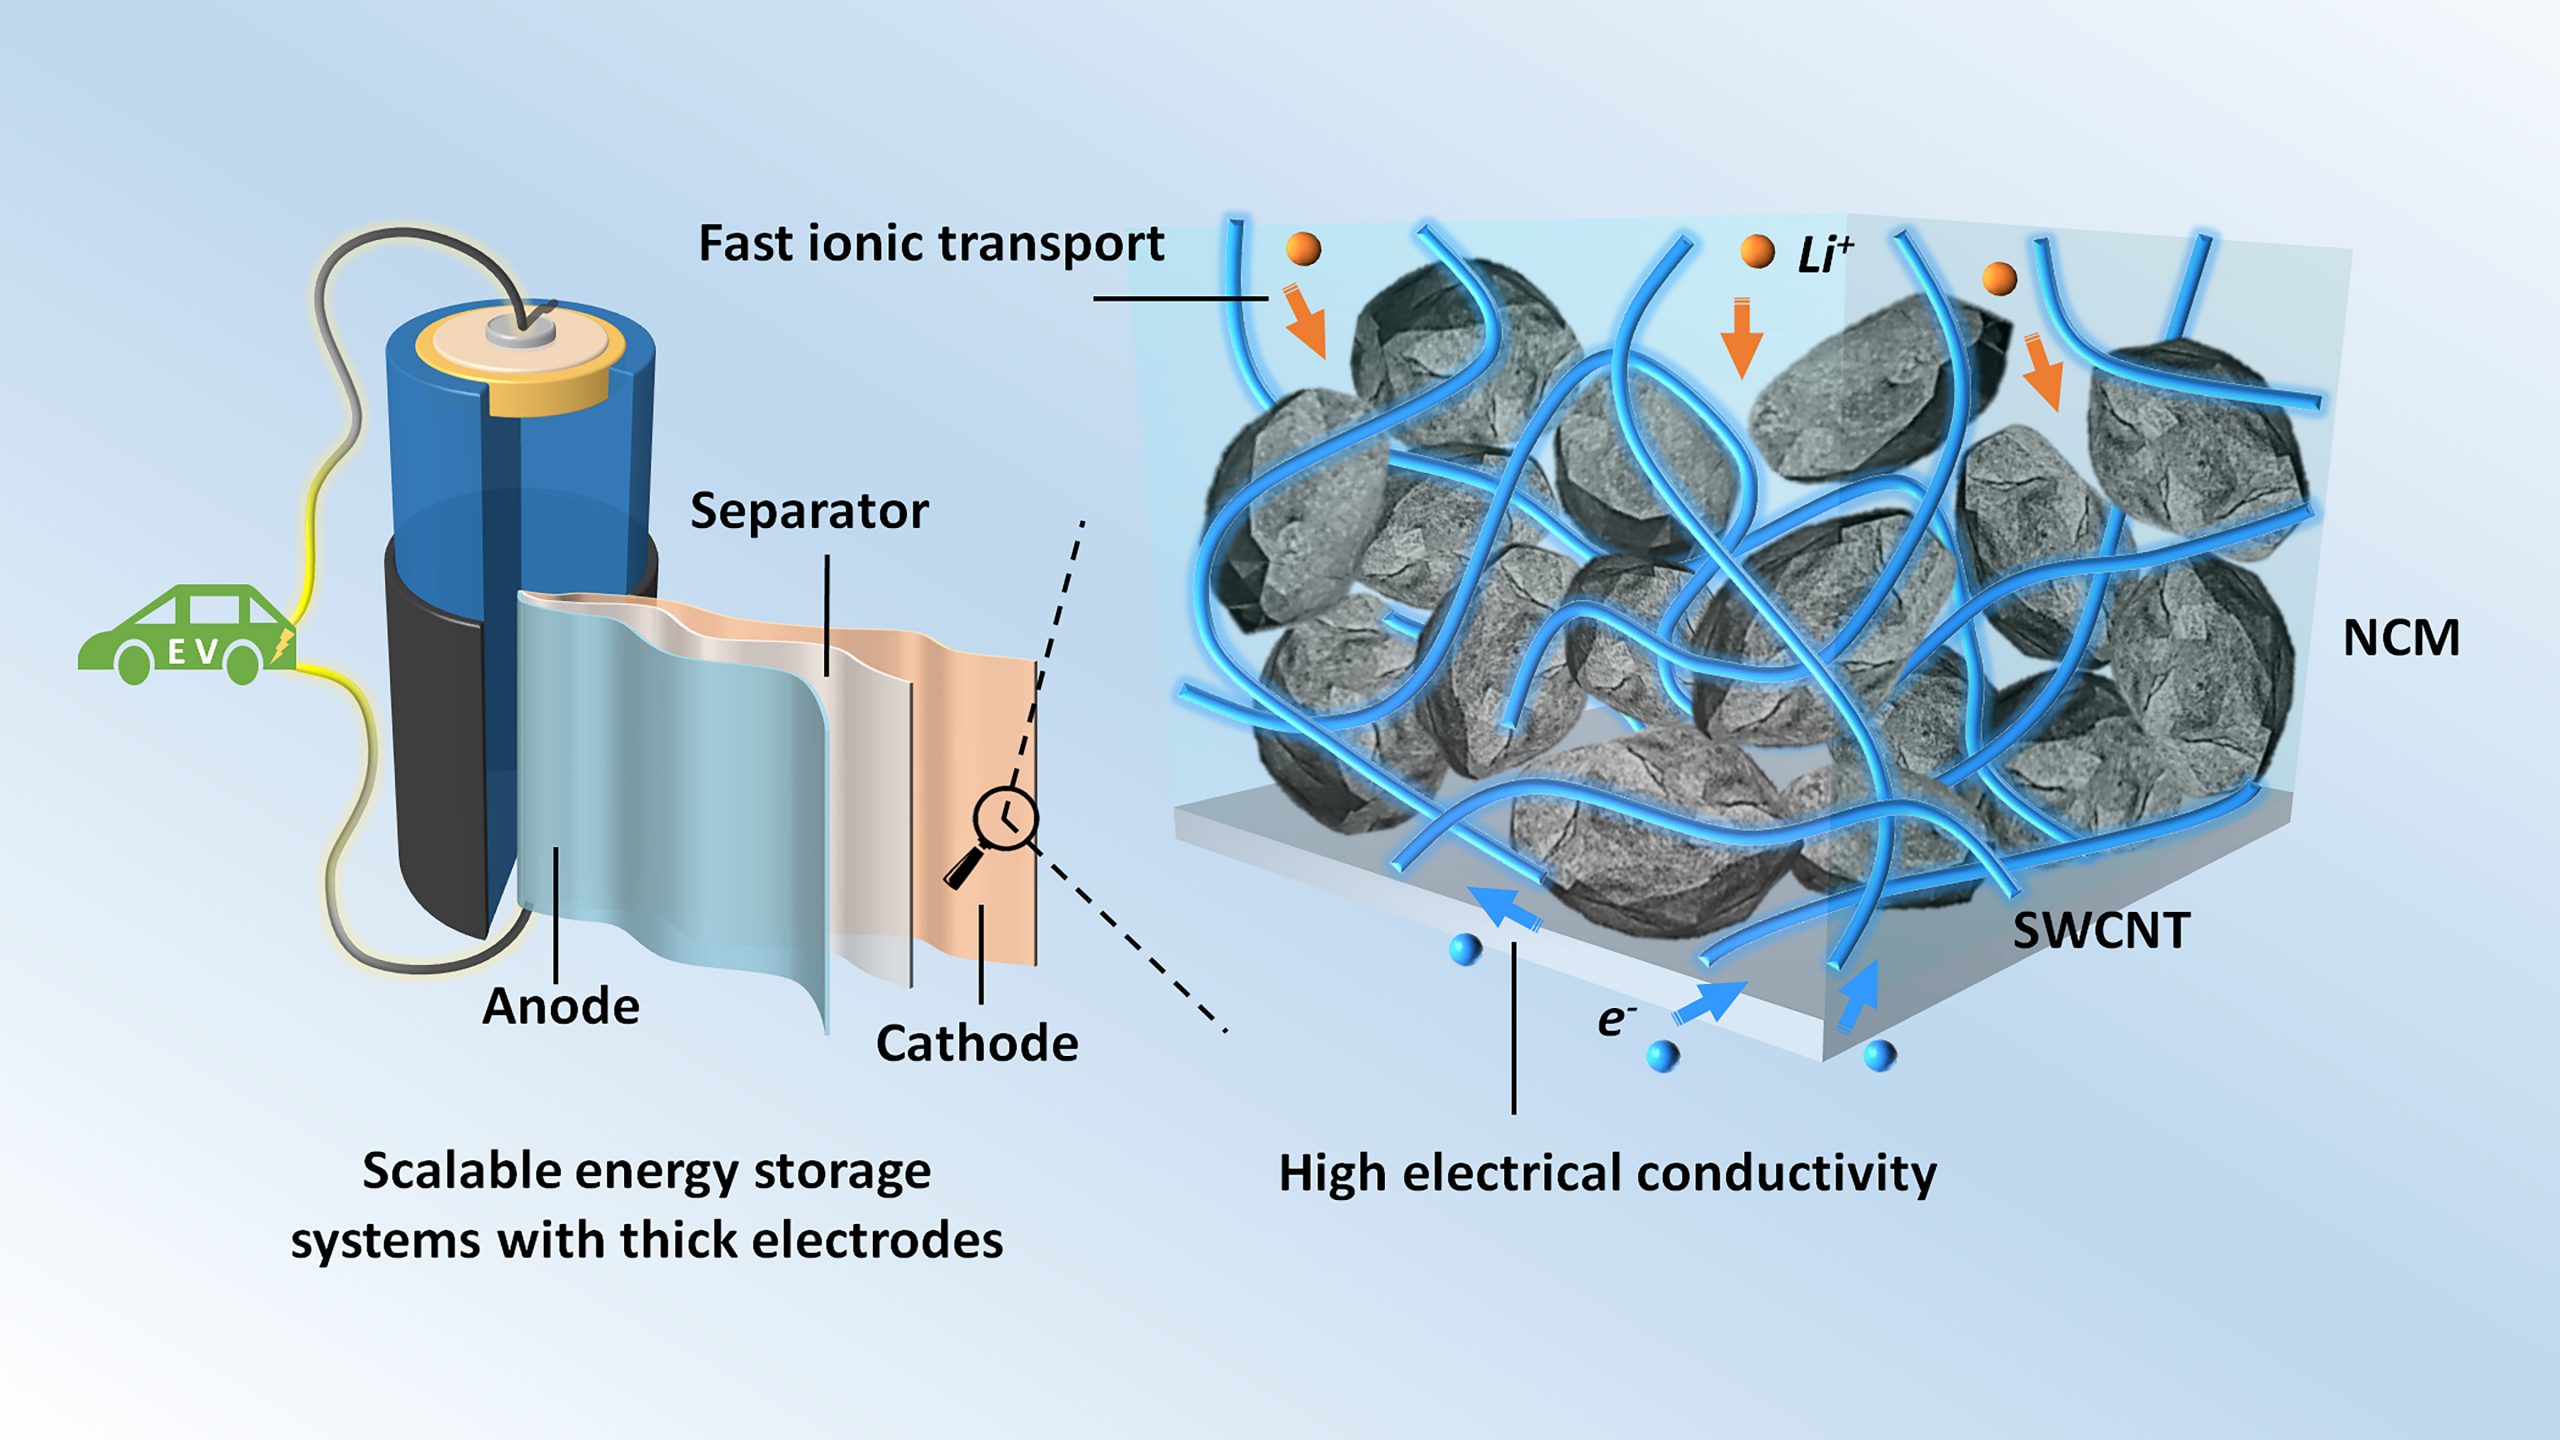 Thick electrodes with single-walled carbon nanotubes